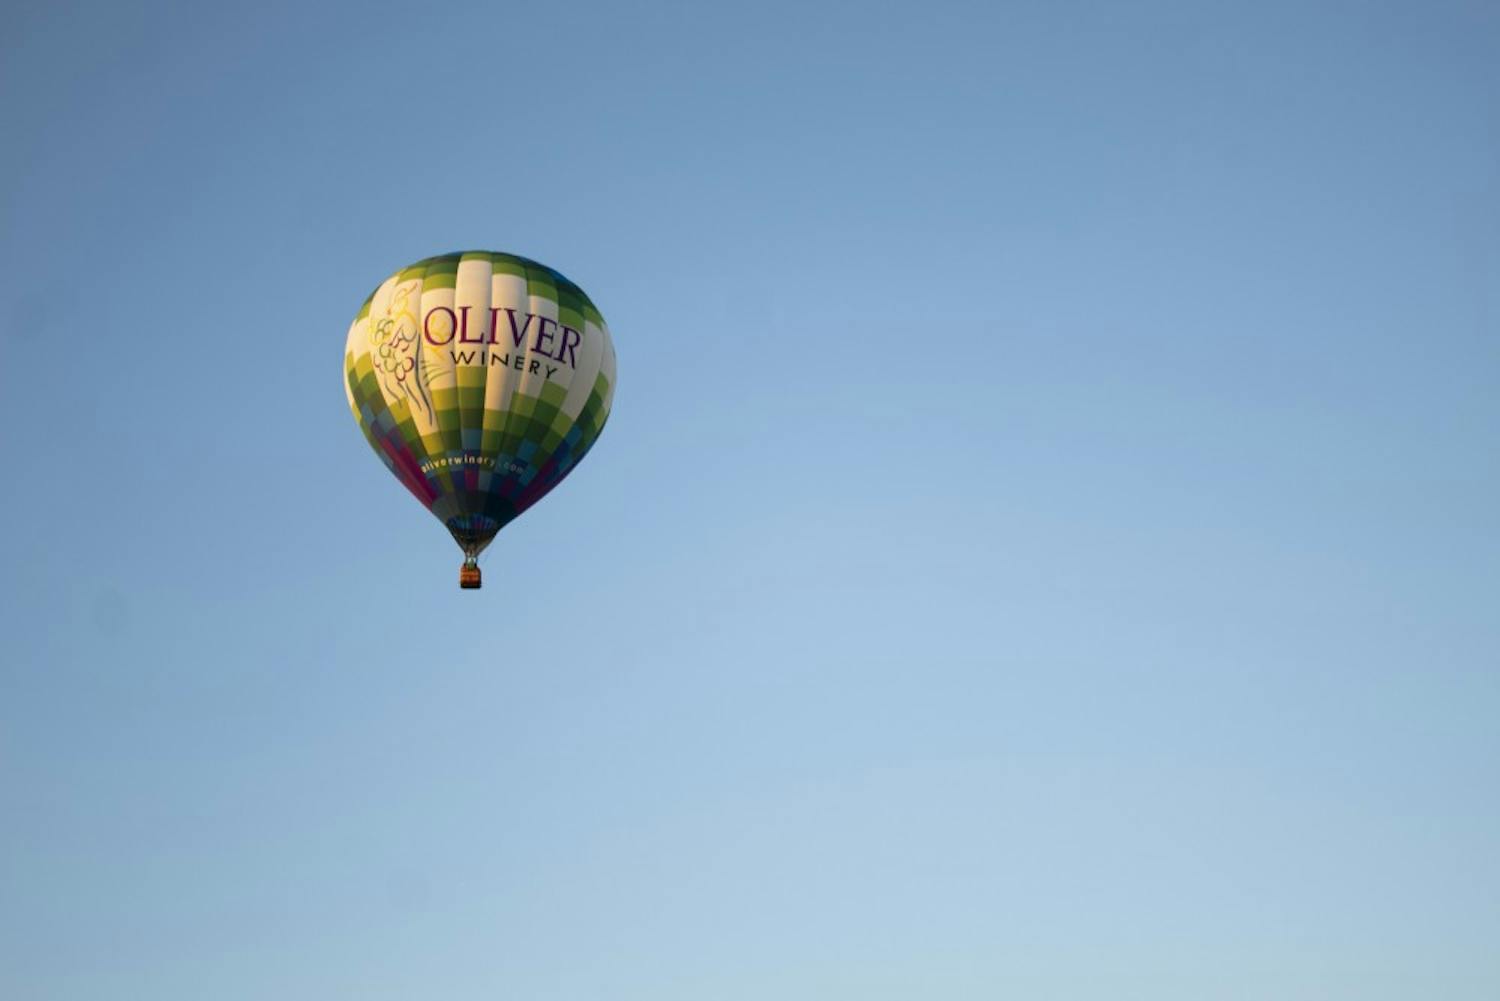 7th annual Kiwanis Club of South Central Indiana Balloon Fest